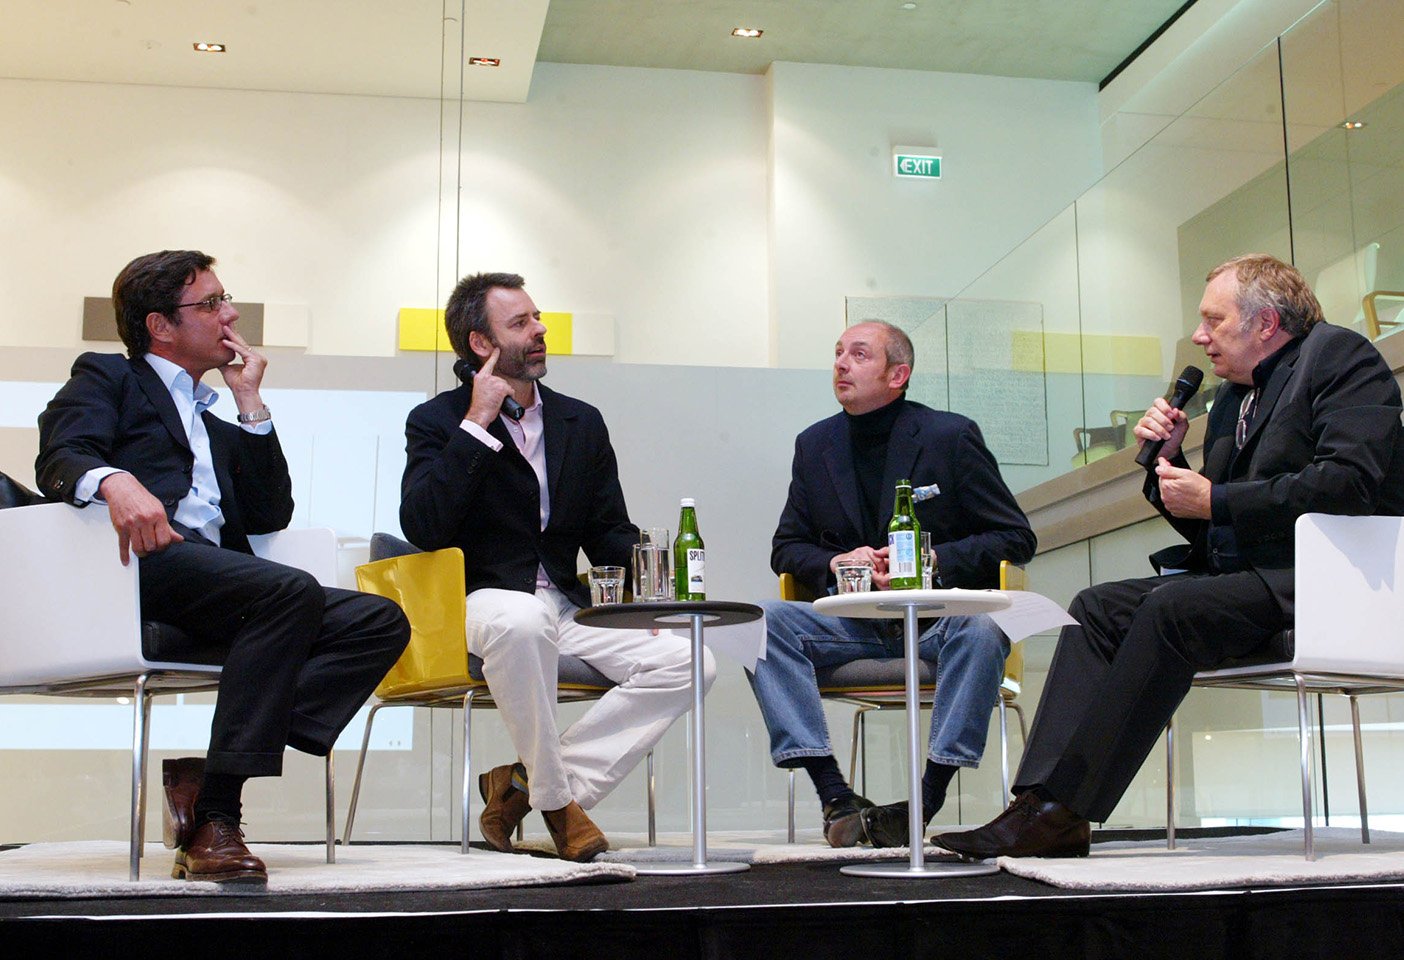 Design dialogues for the 'Tailor Made' festival, with David Clark, then editor-in-chief of Vogue Living, architect and designer Piero Lissoni, and Kevin Jarrett. Photo c/o Space.